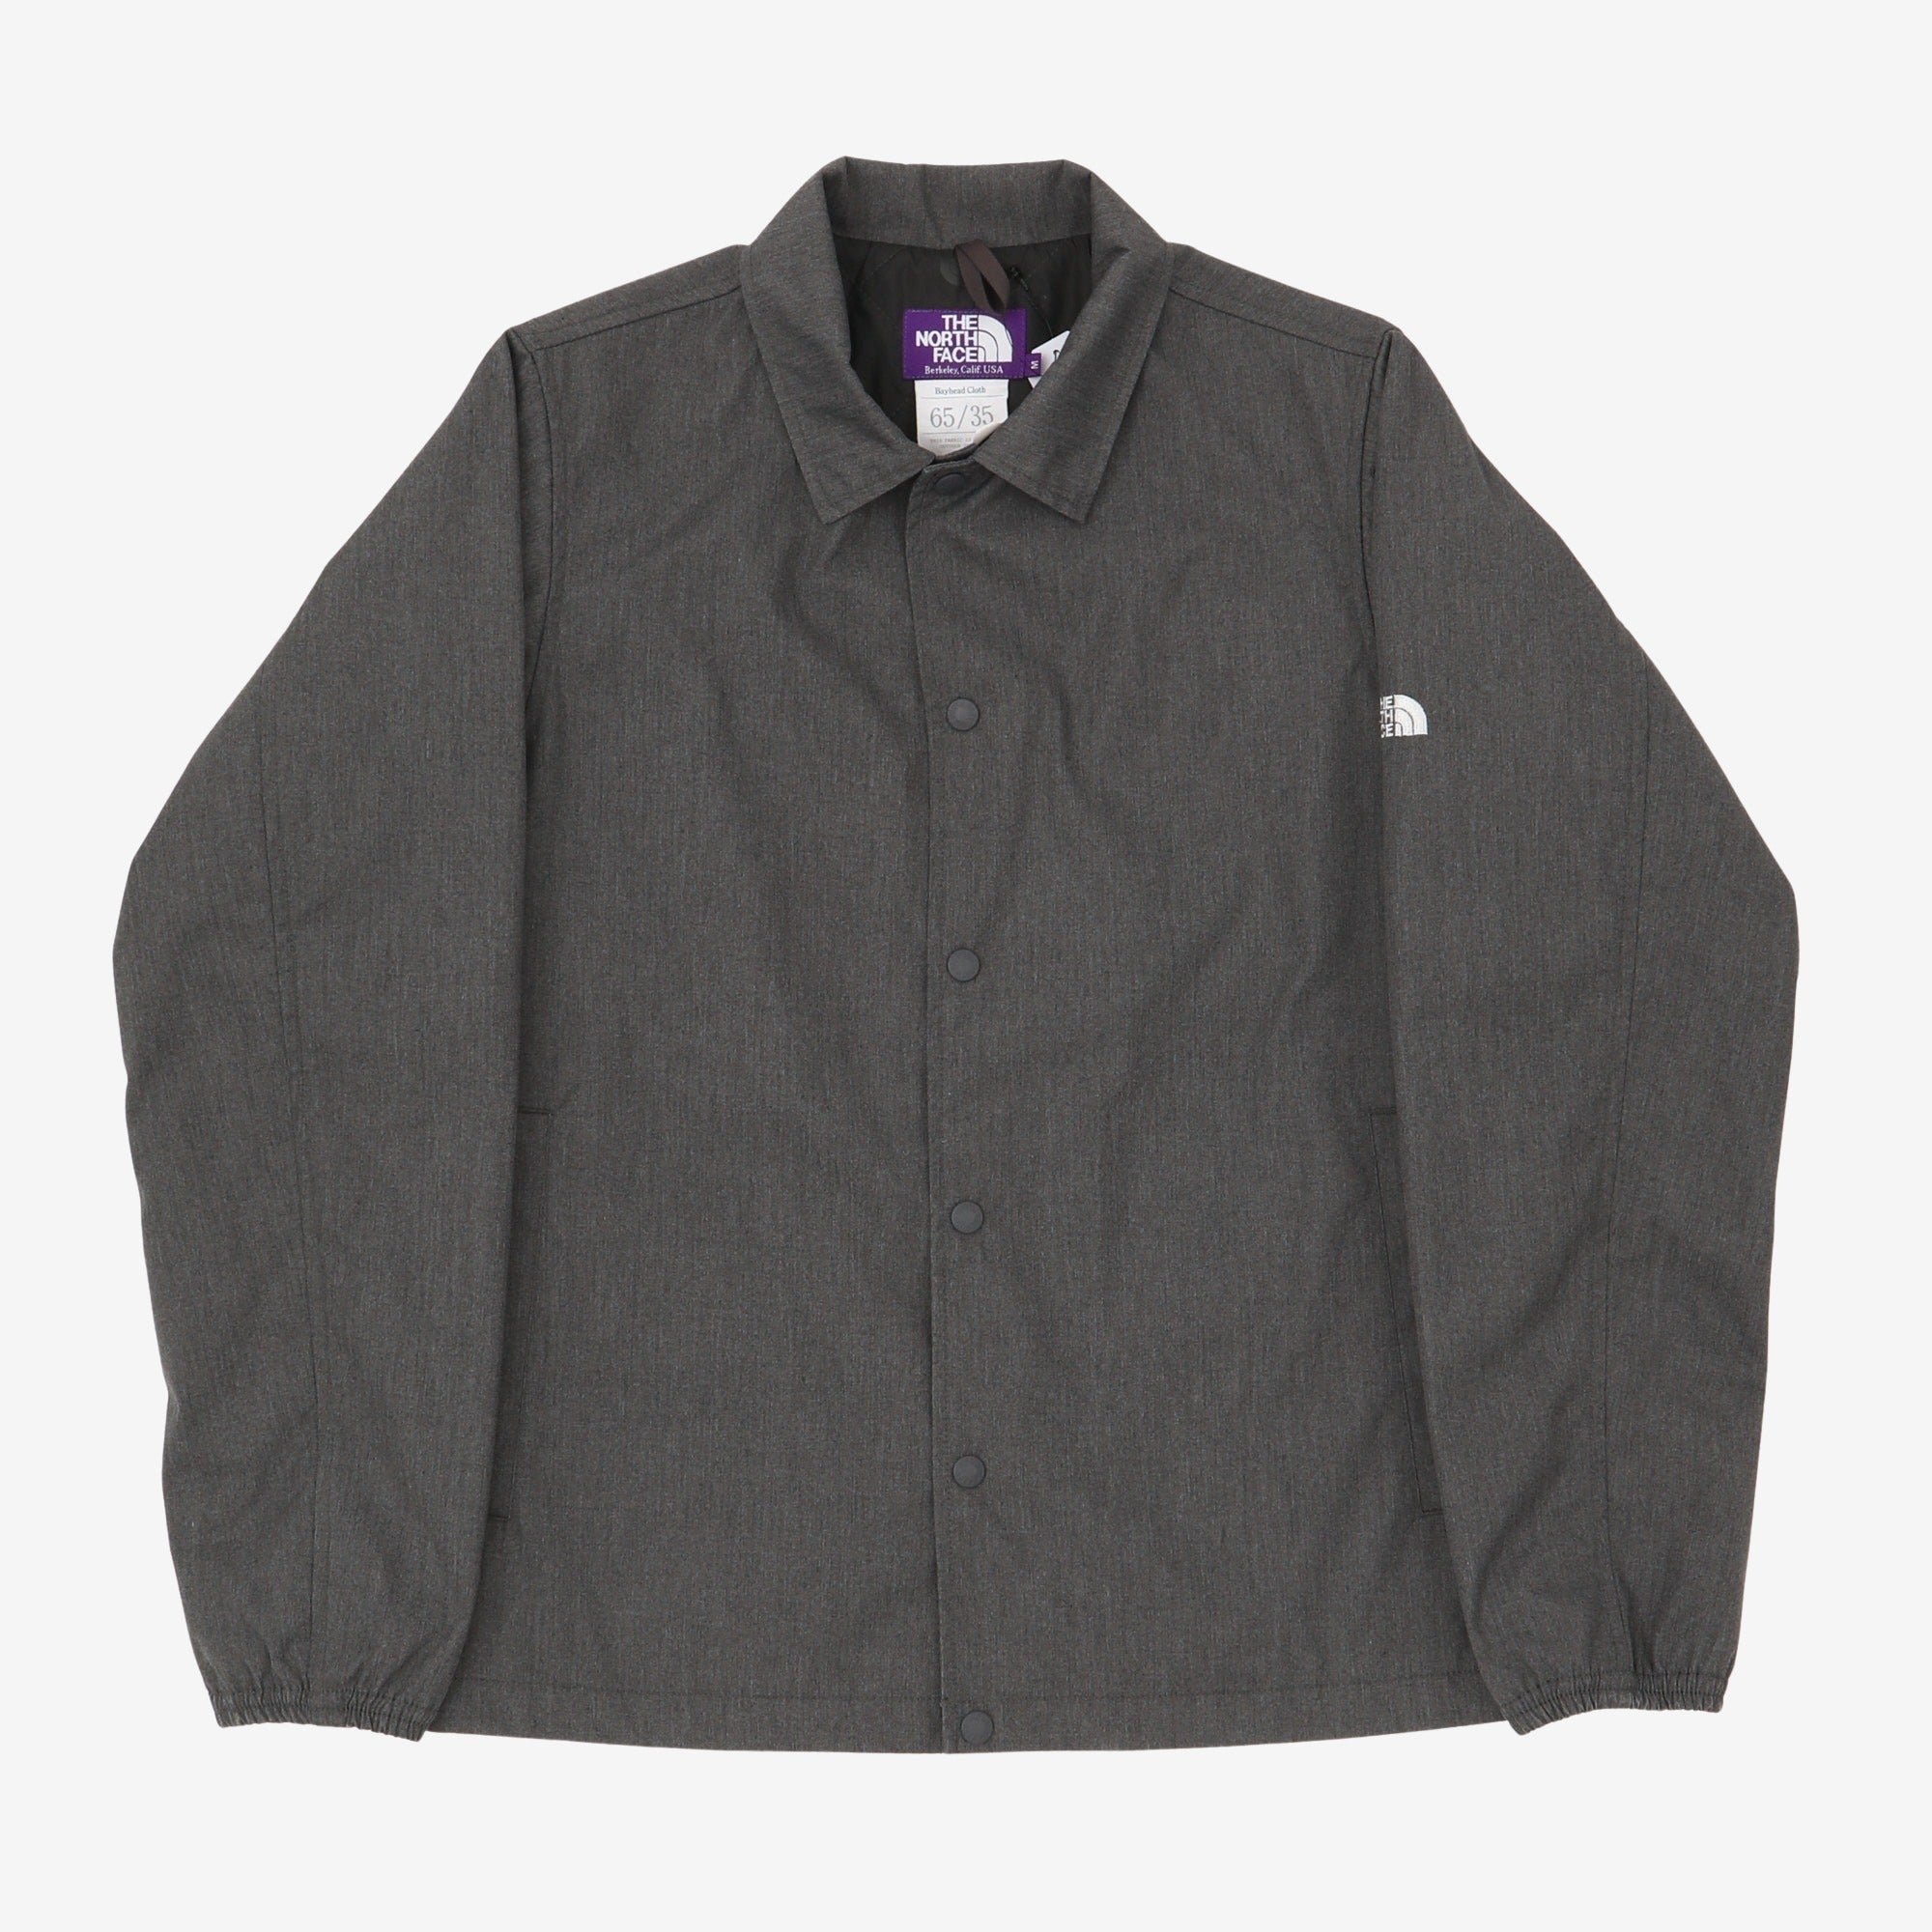 Purple Label 65/35 Insulated Jacket